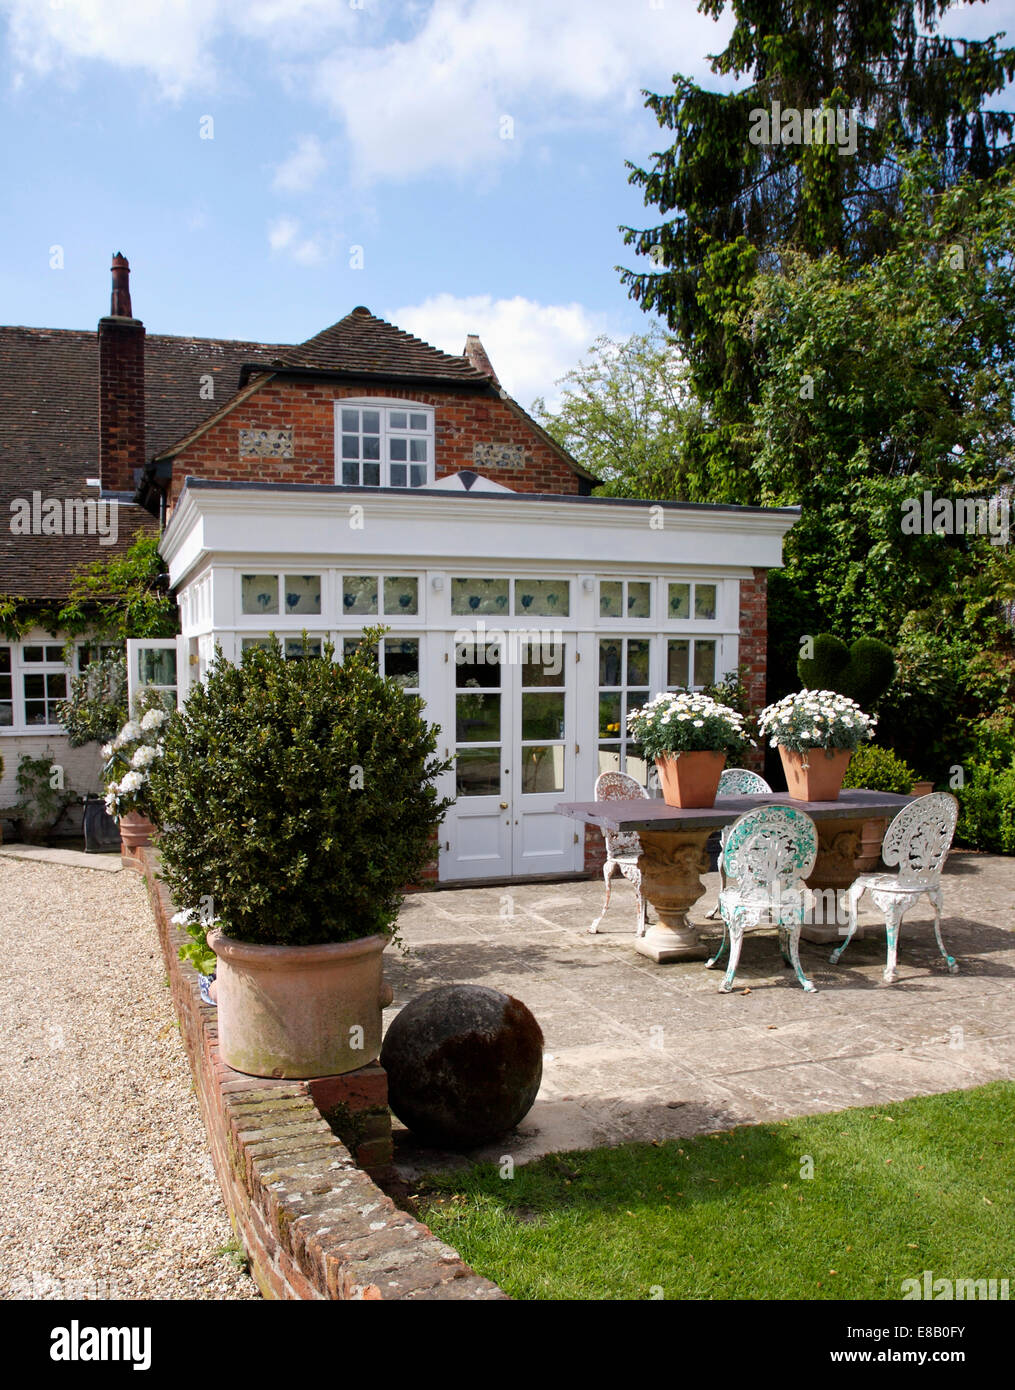 Clipped box in large pot on paved patio with table and chairs in front of country house with conservatory extension Stock Photo